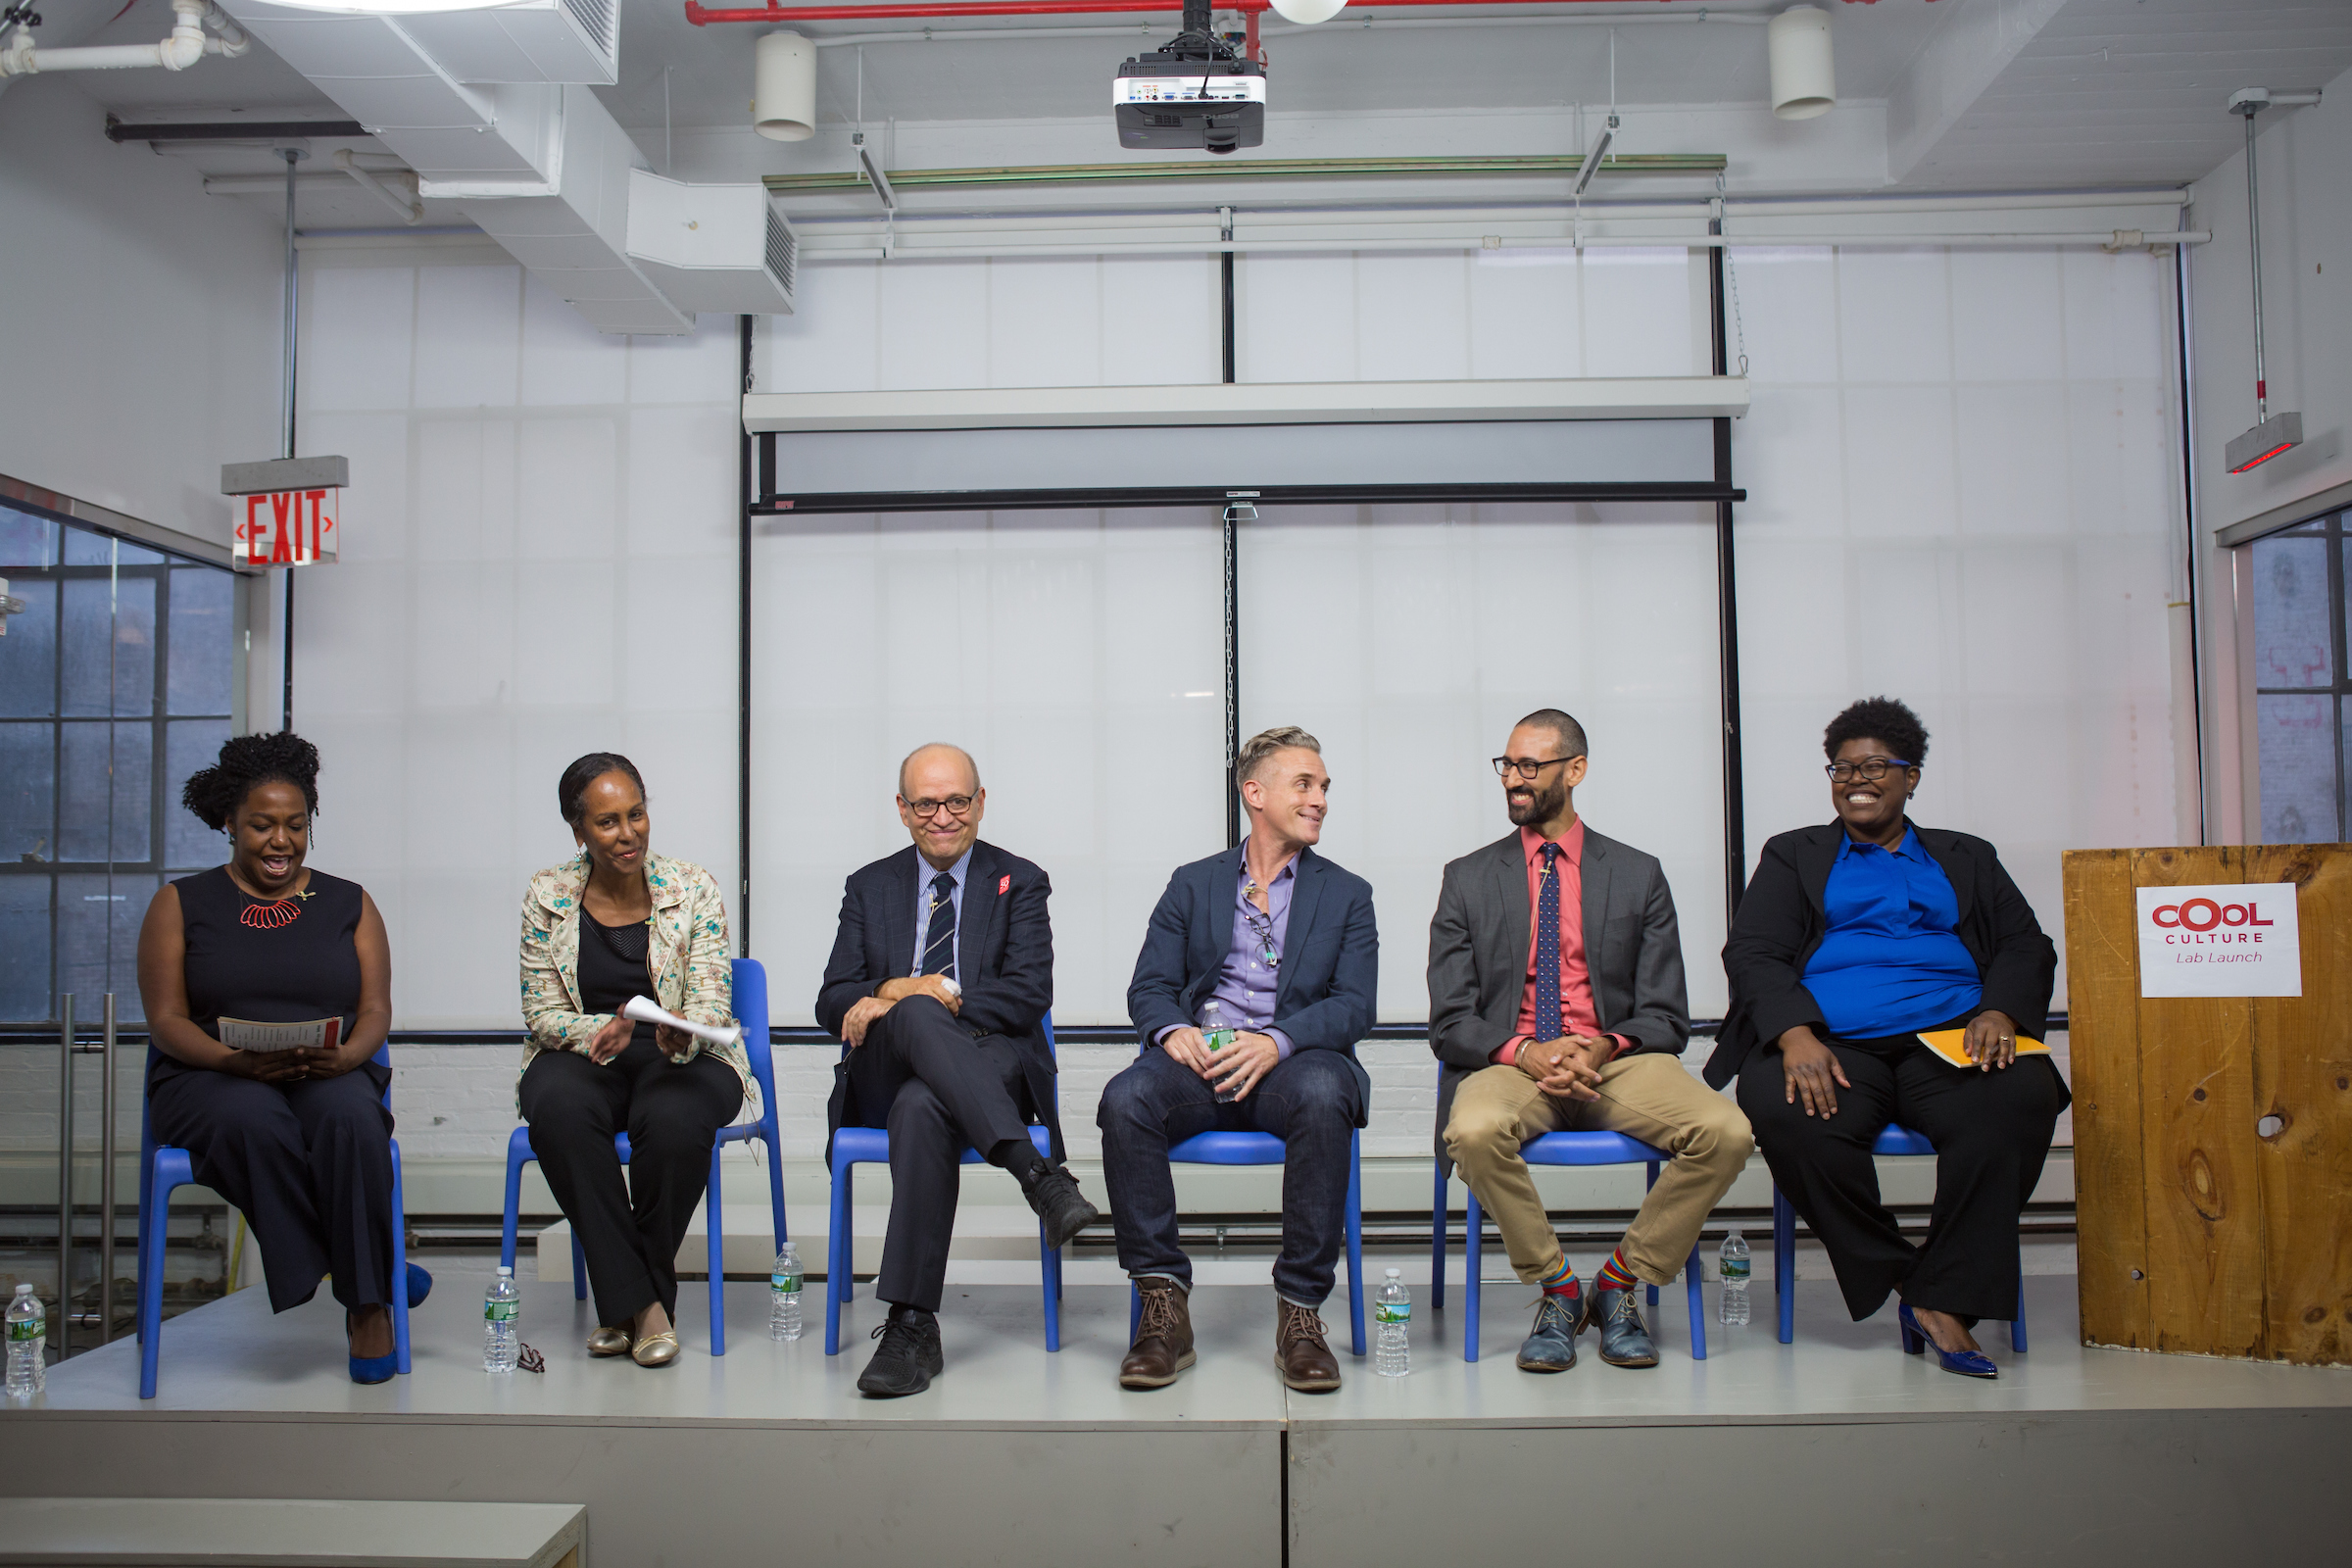 Panelists at the launch of the 2016 Laboratory for New Audiences. Courtesy of Margarita Corporan.